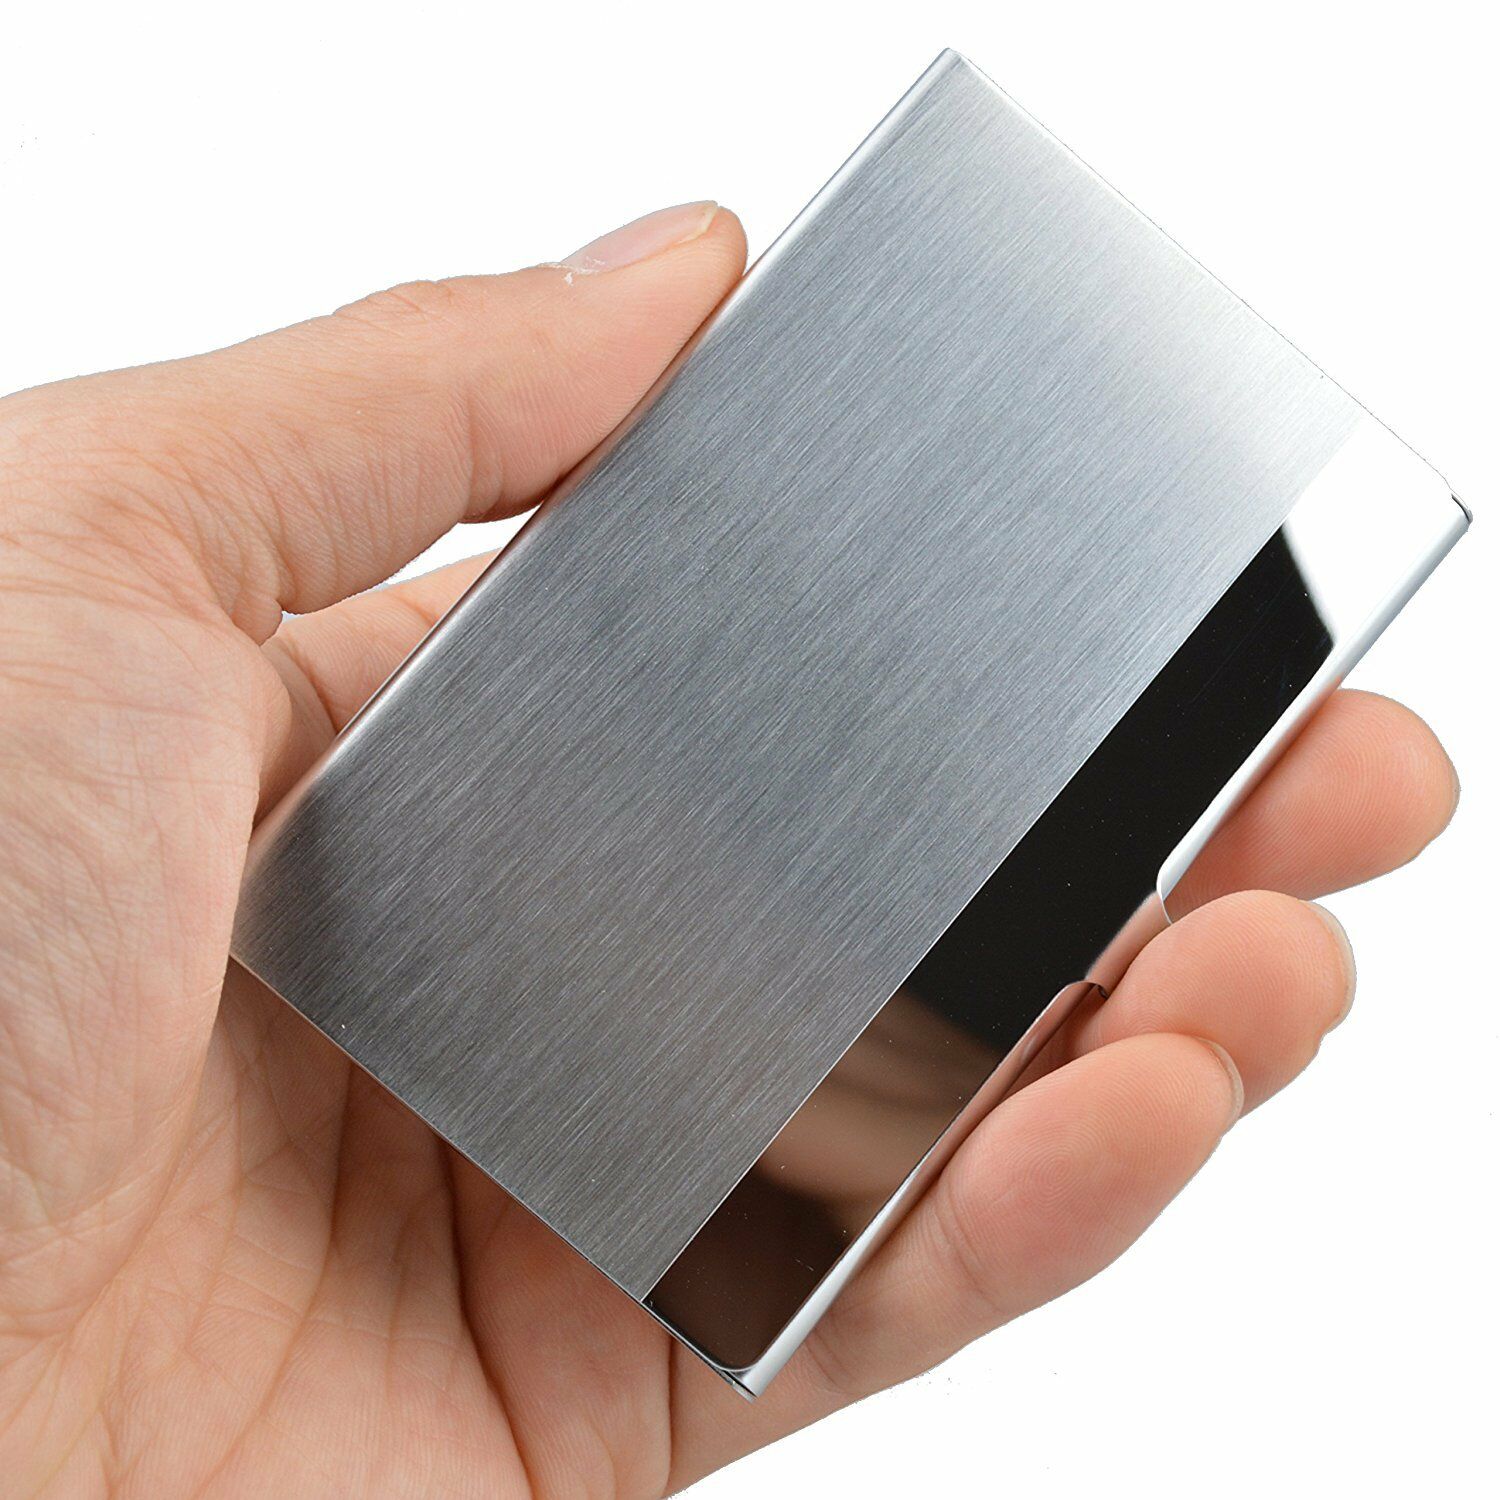 Pocket Stainless Steel & Metal Business Card Holder Case Id Credit Wallet Silver